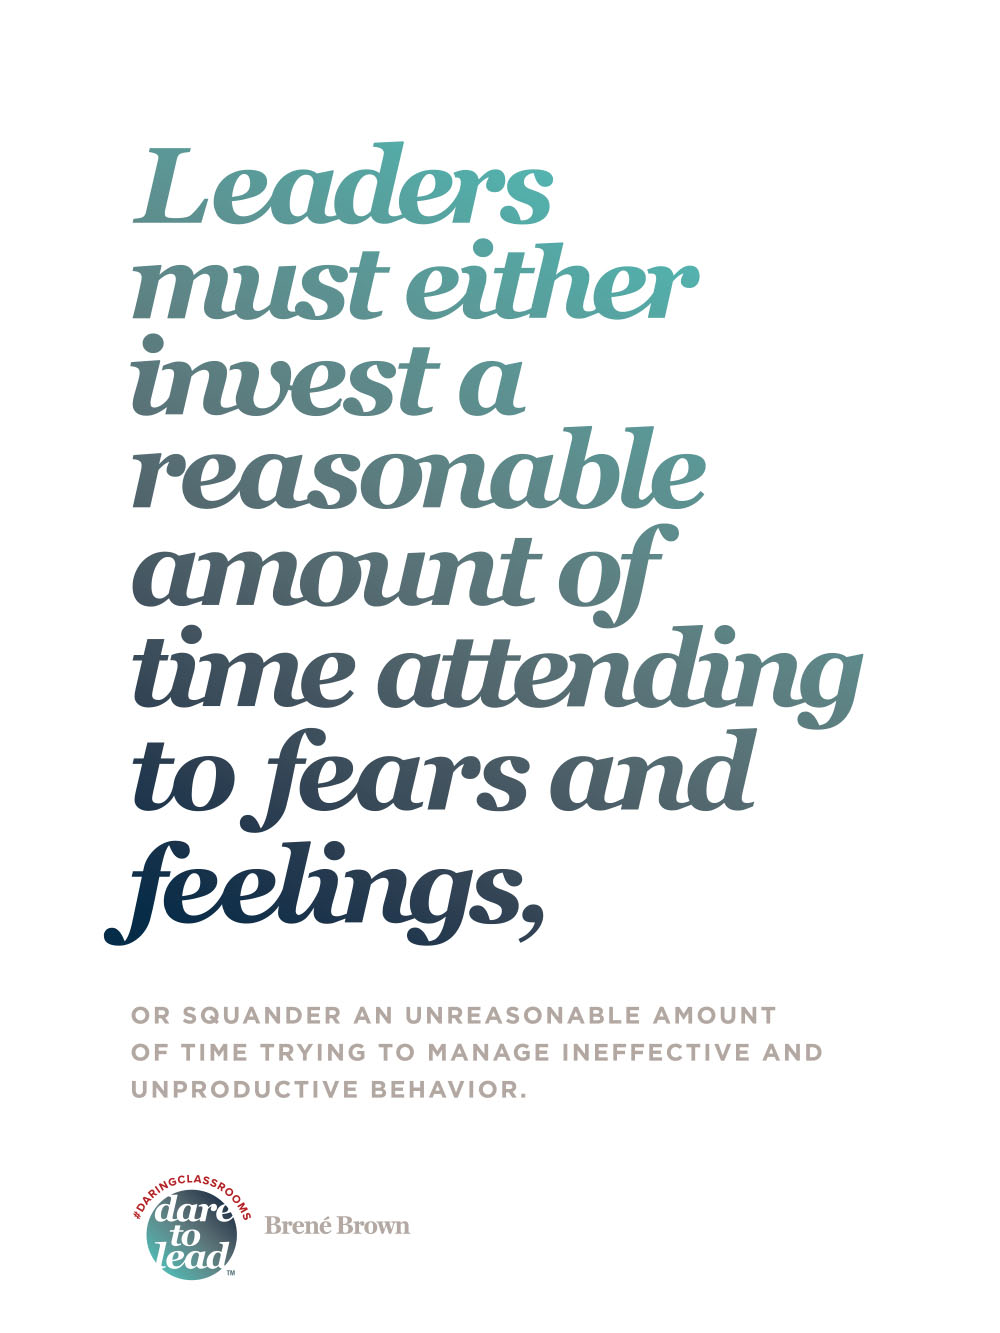 Leaders must either invest a reasonable amount of time attending to fears and feelings, or squander an unreasonable amount of time trying to manage ineffective and unproductive behavior.